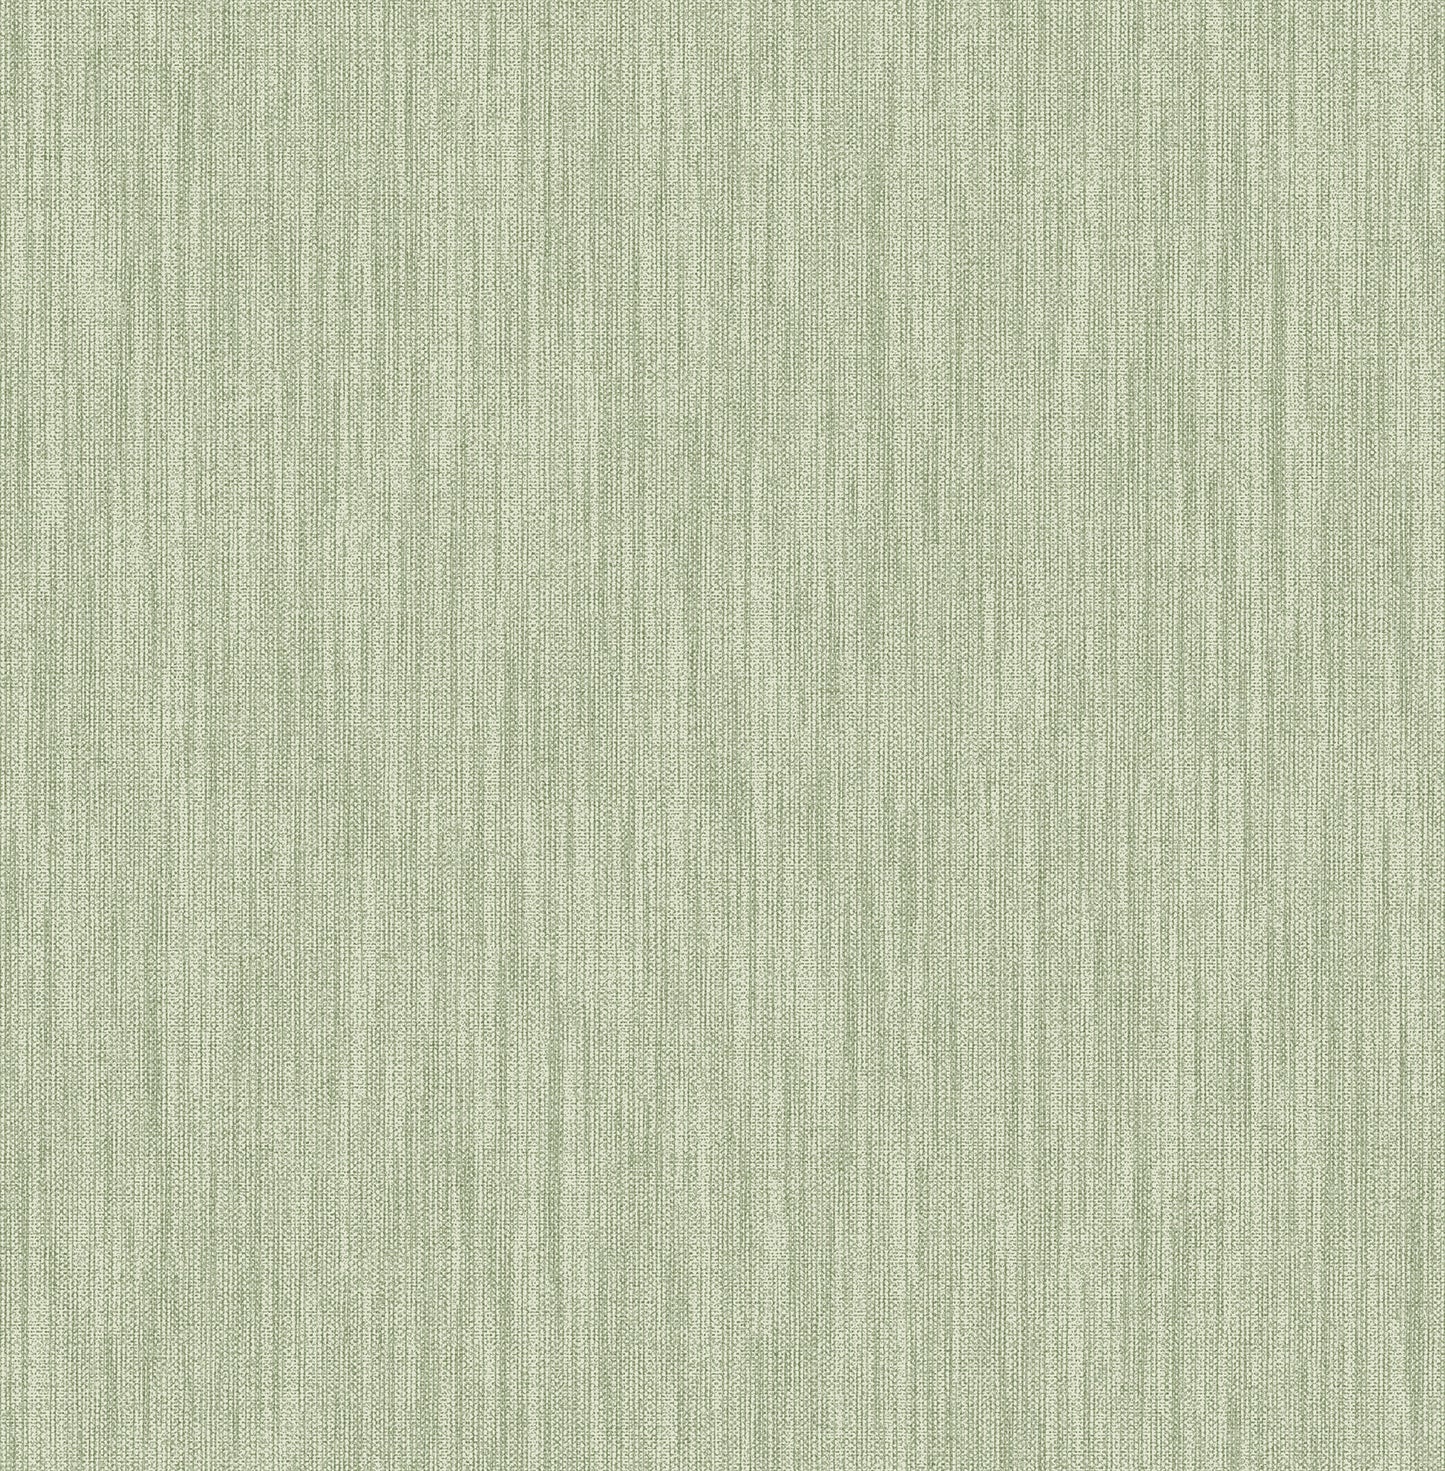 Select 2948-25282 Spring Chiniile Sage Linen Texture Sage A-Street Prints Wallpaper